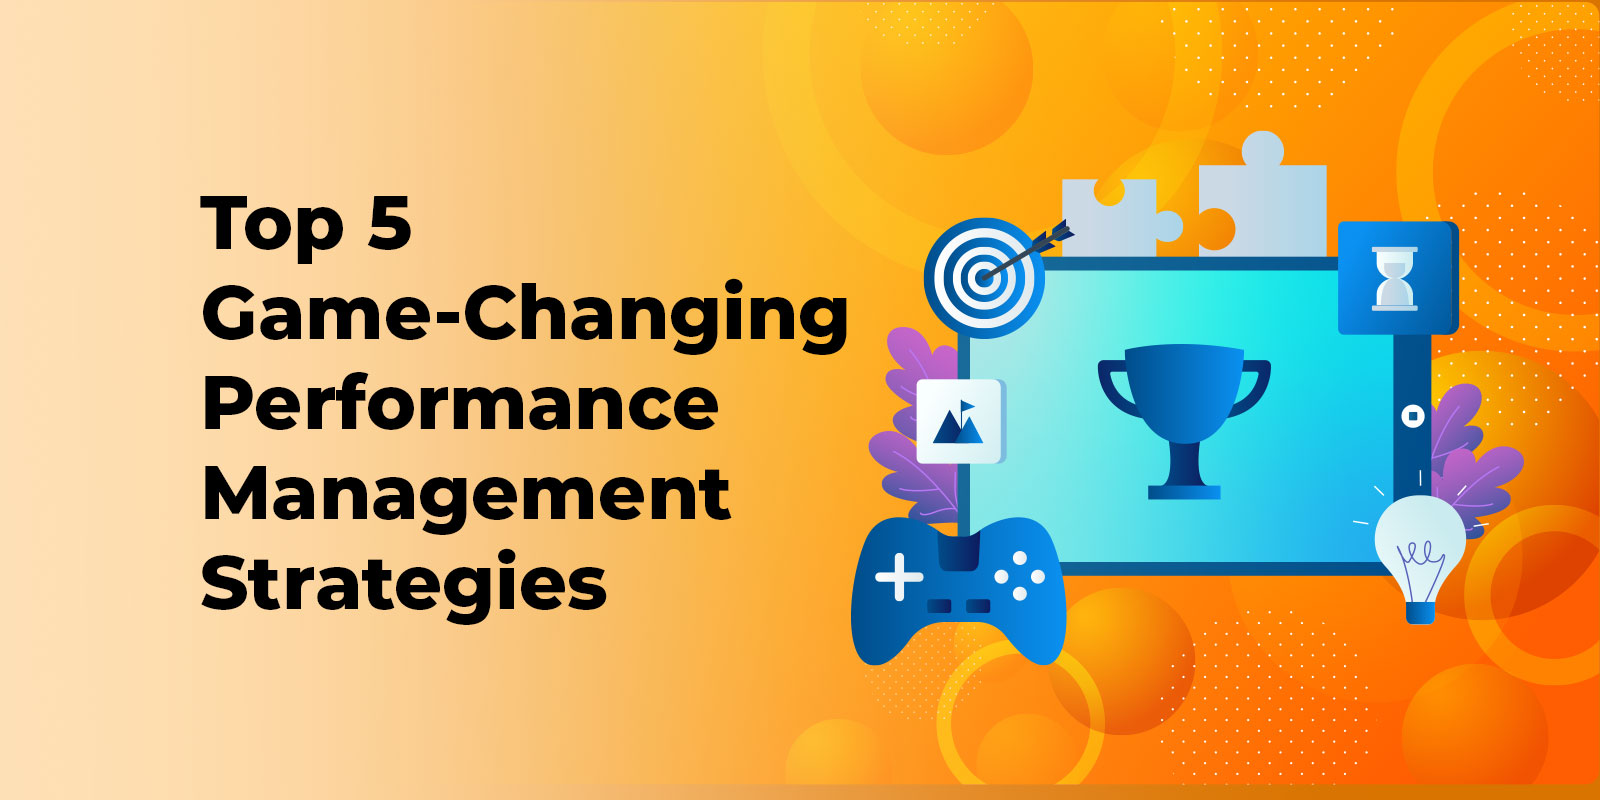 Top 5 Game-Changing Performance Management Strategies